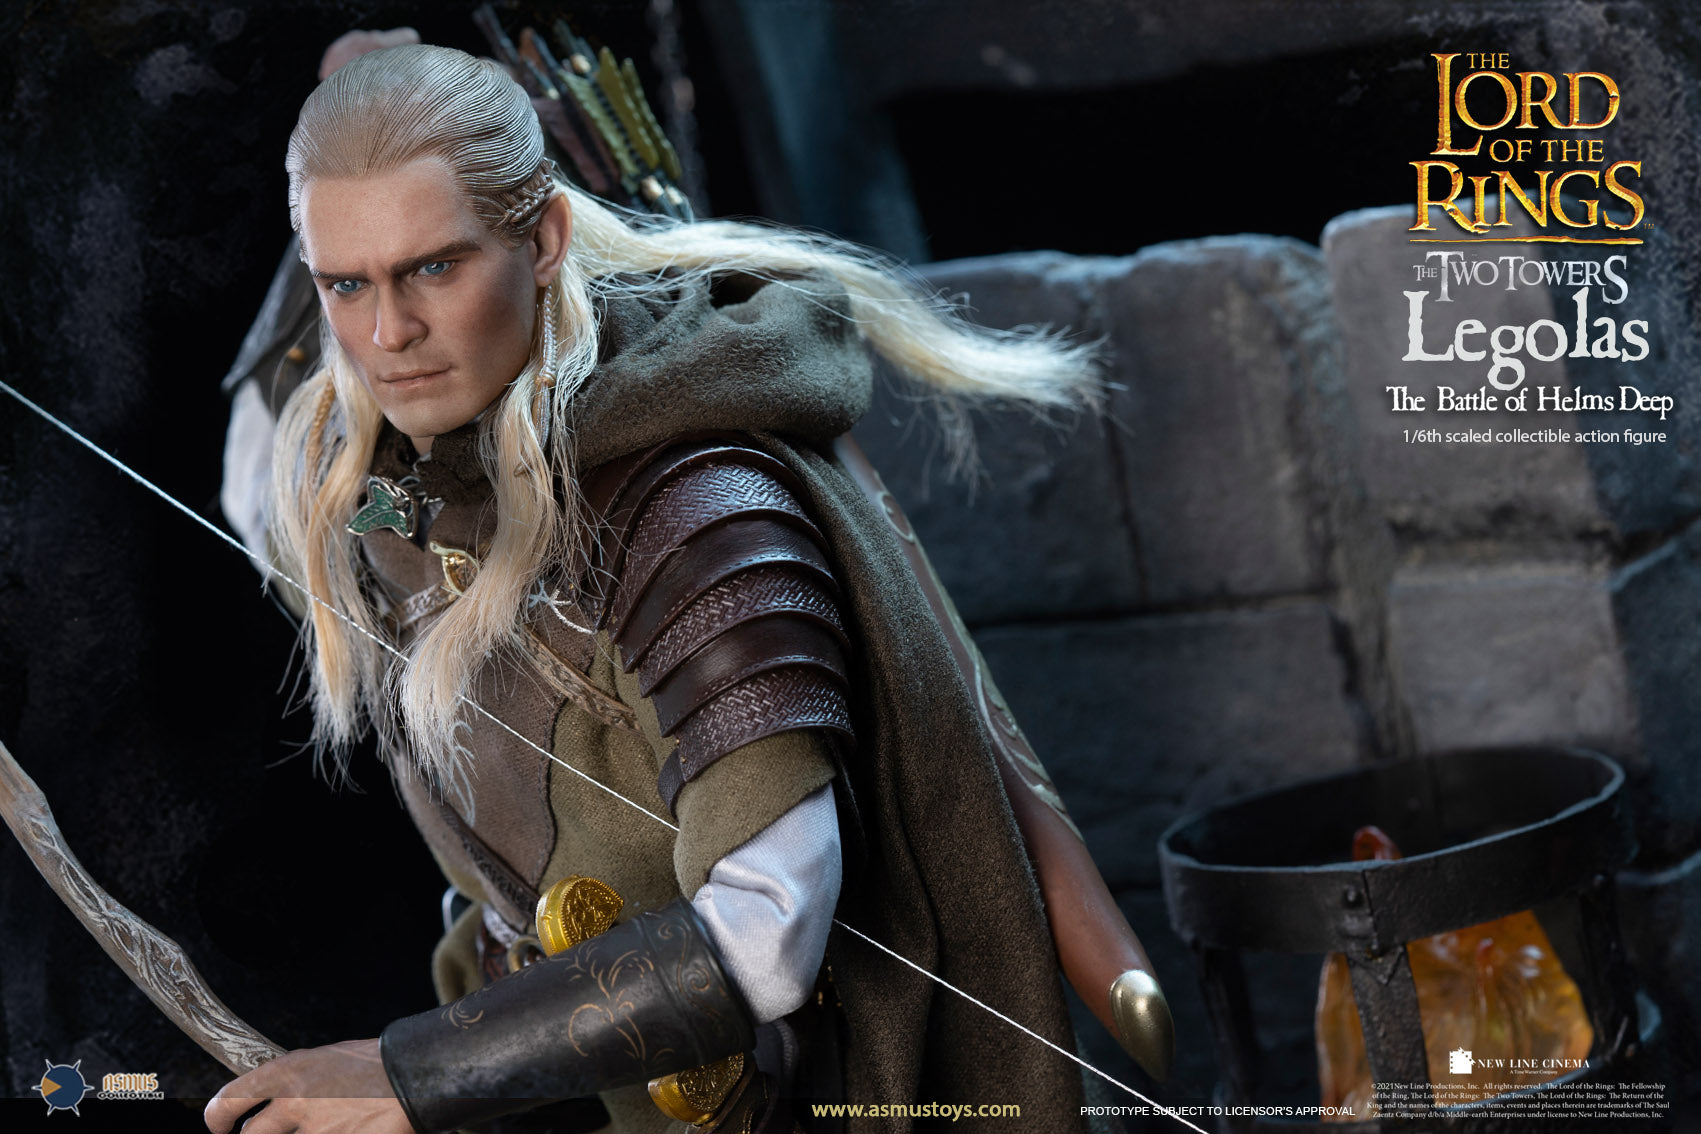 Asmus Toys - The Lord of the Rings: The Two Towers - The Battle of Helm's Deep - Legolas